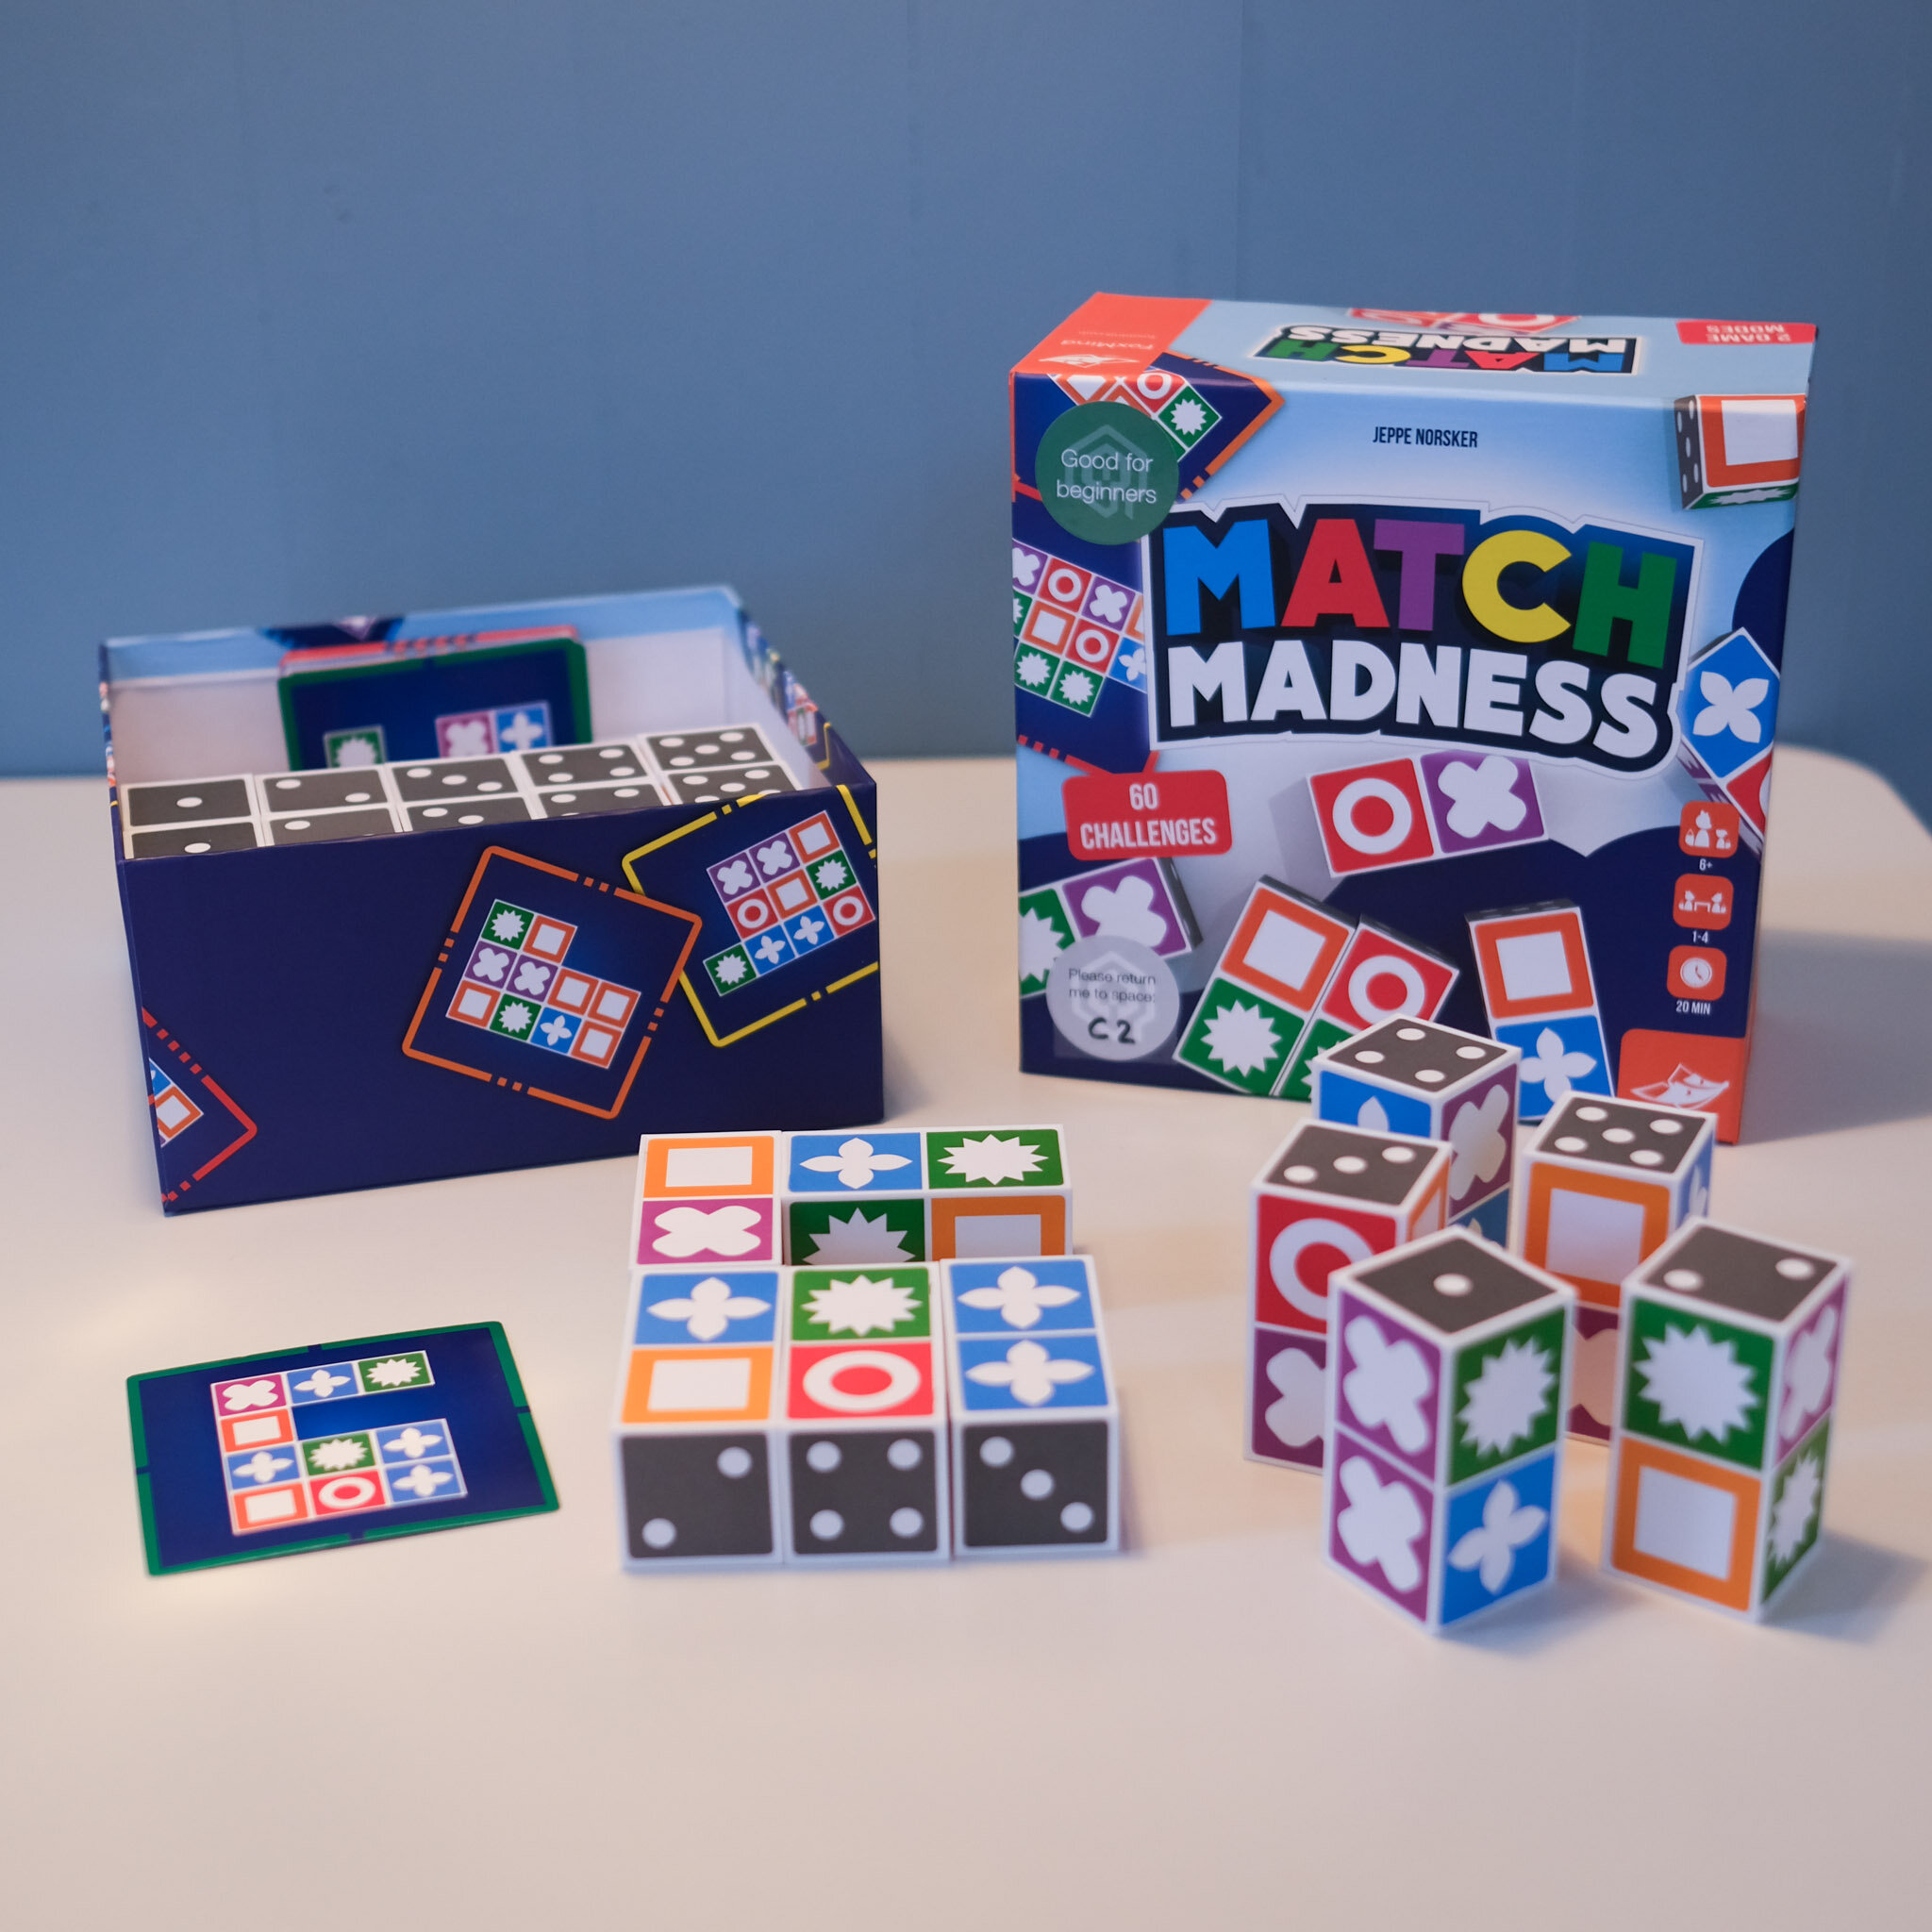 Match Madness profile — The Treehouse